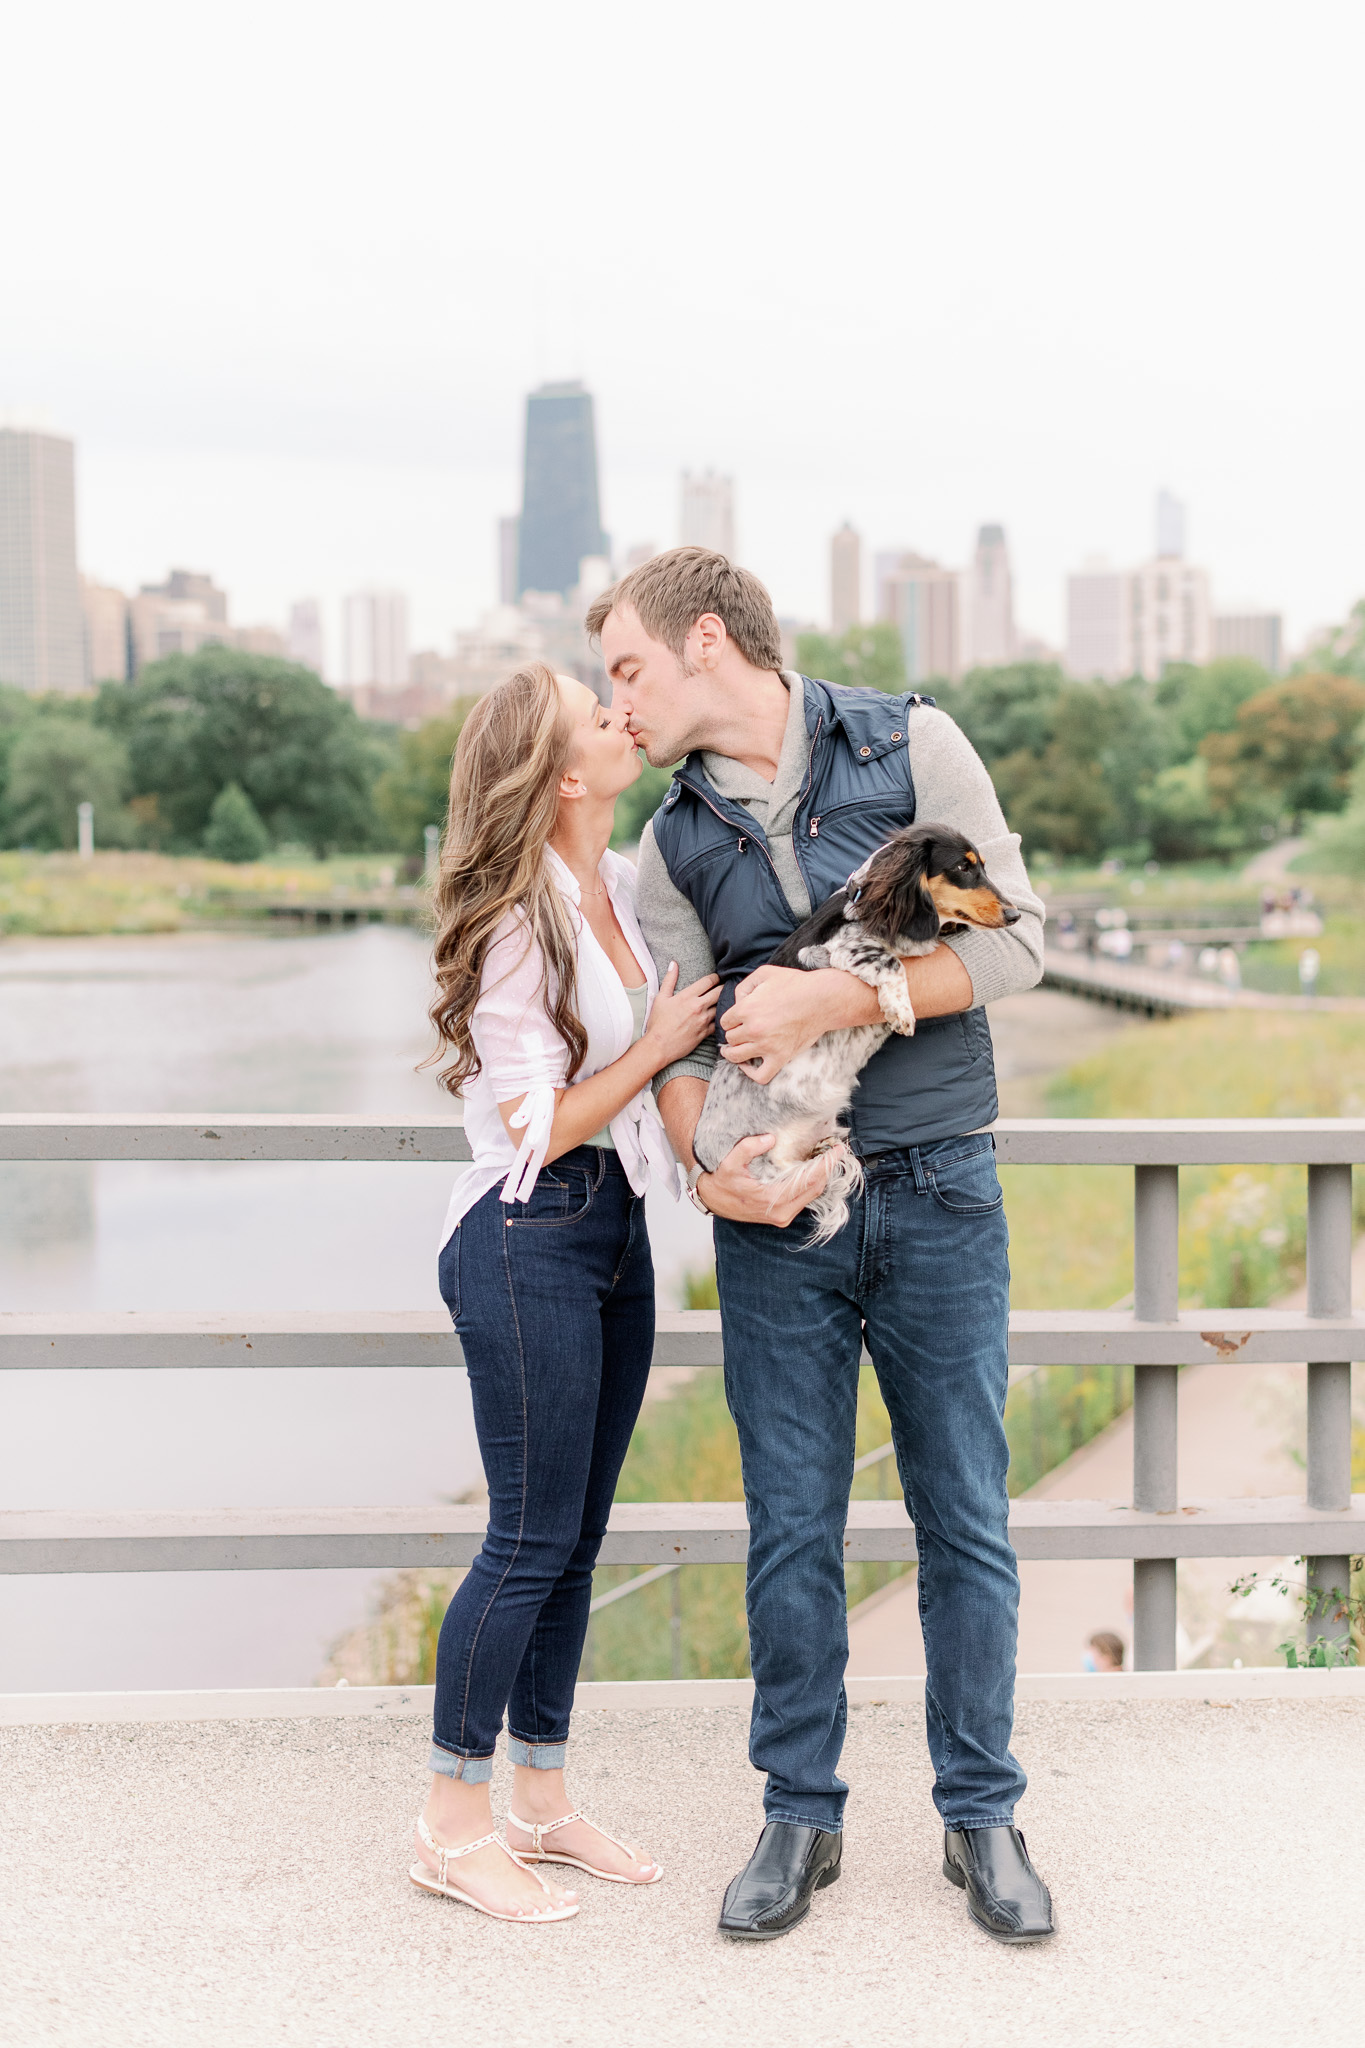 Chicago Engagement Photos with Dog - Where to take photos in Chicago with your dog